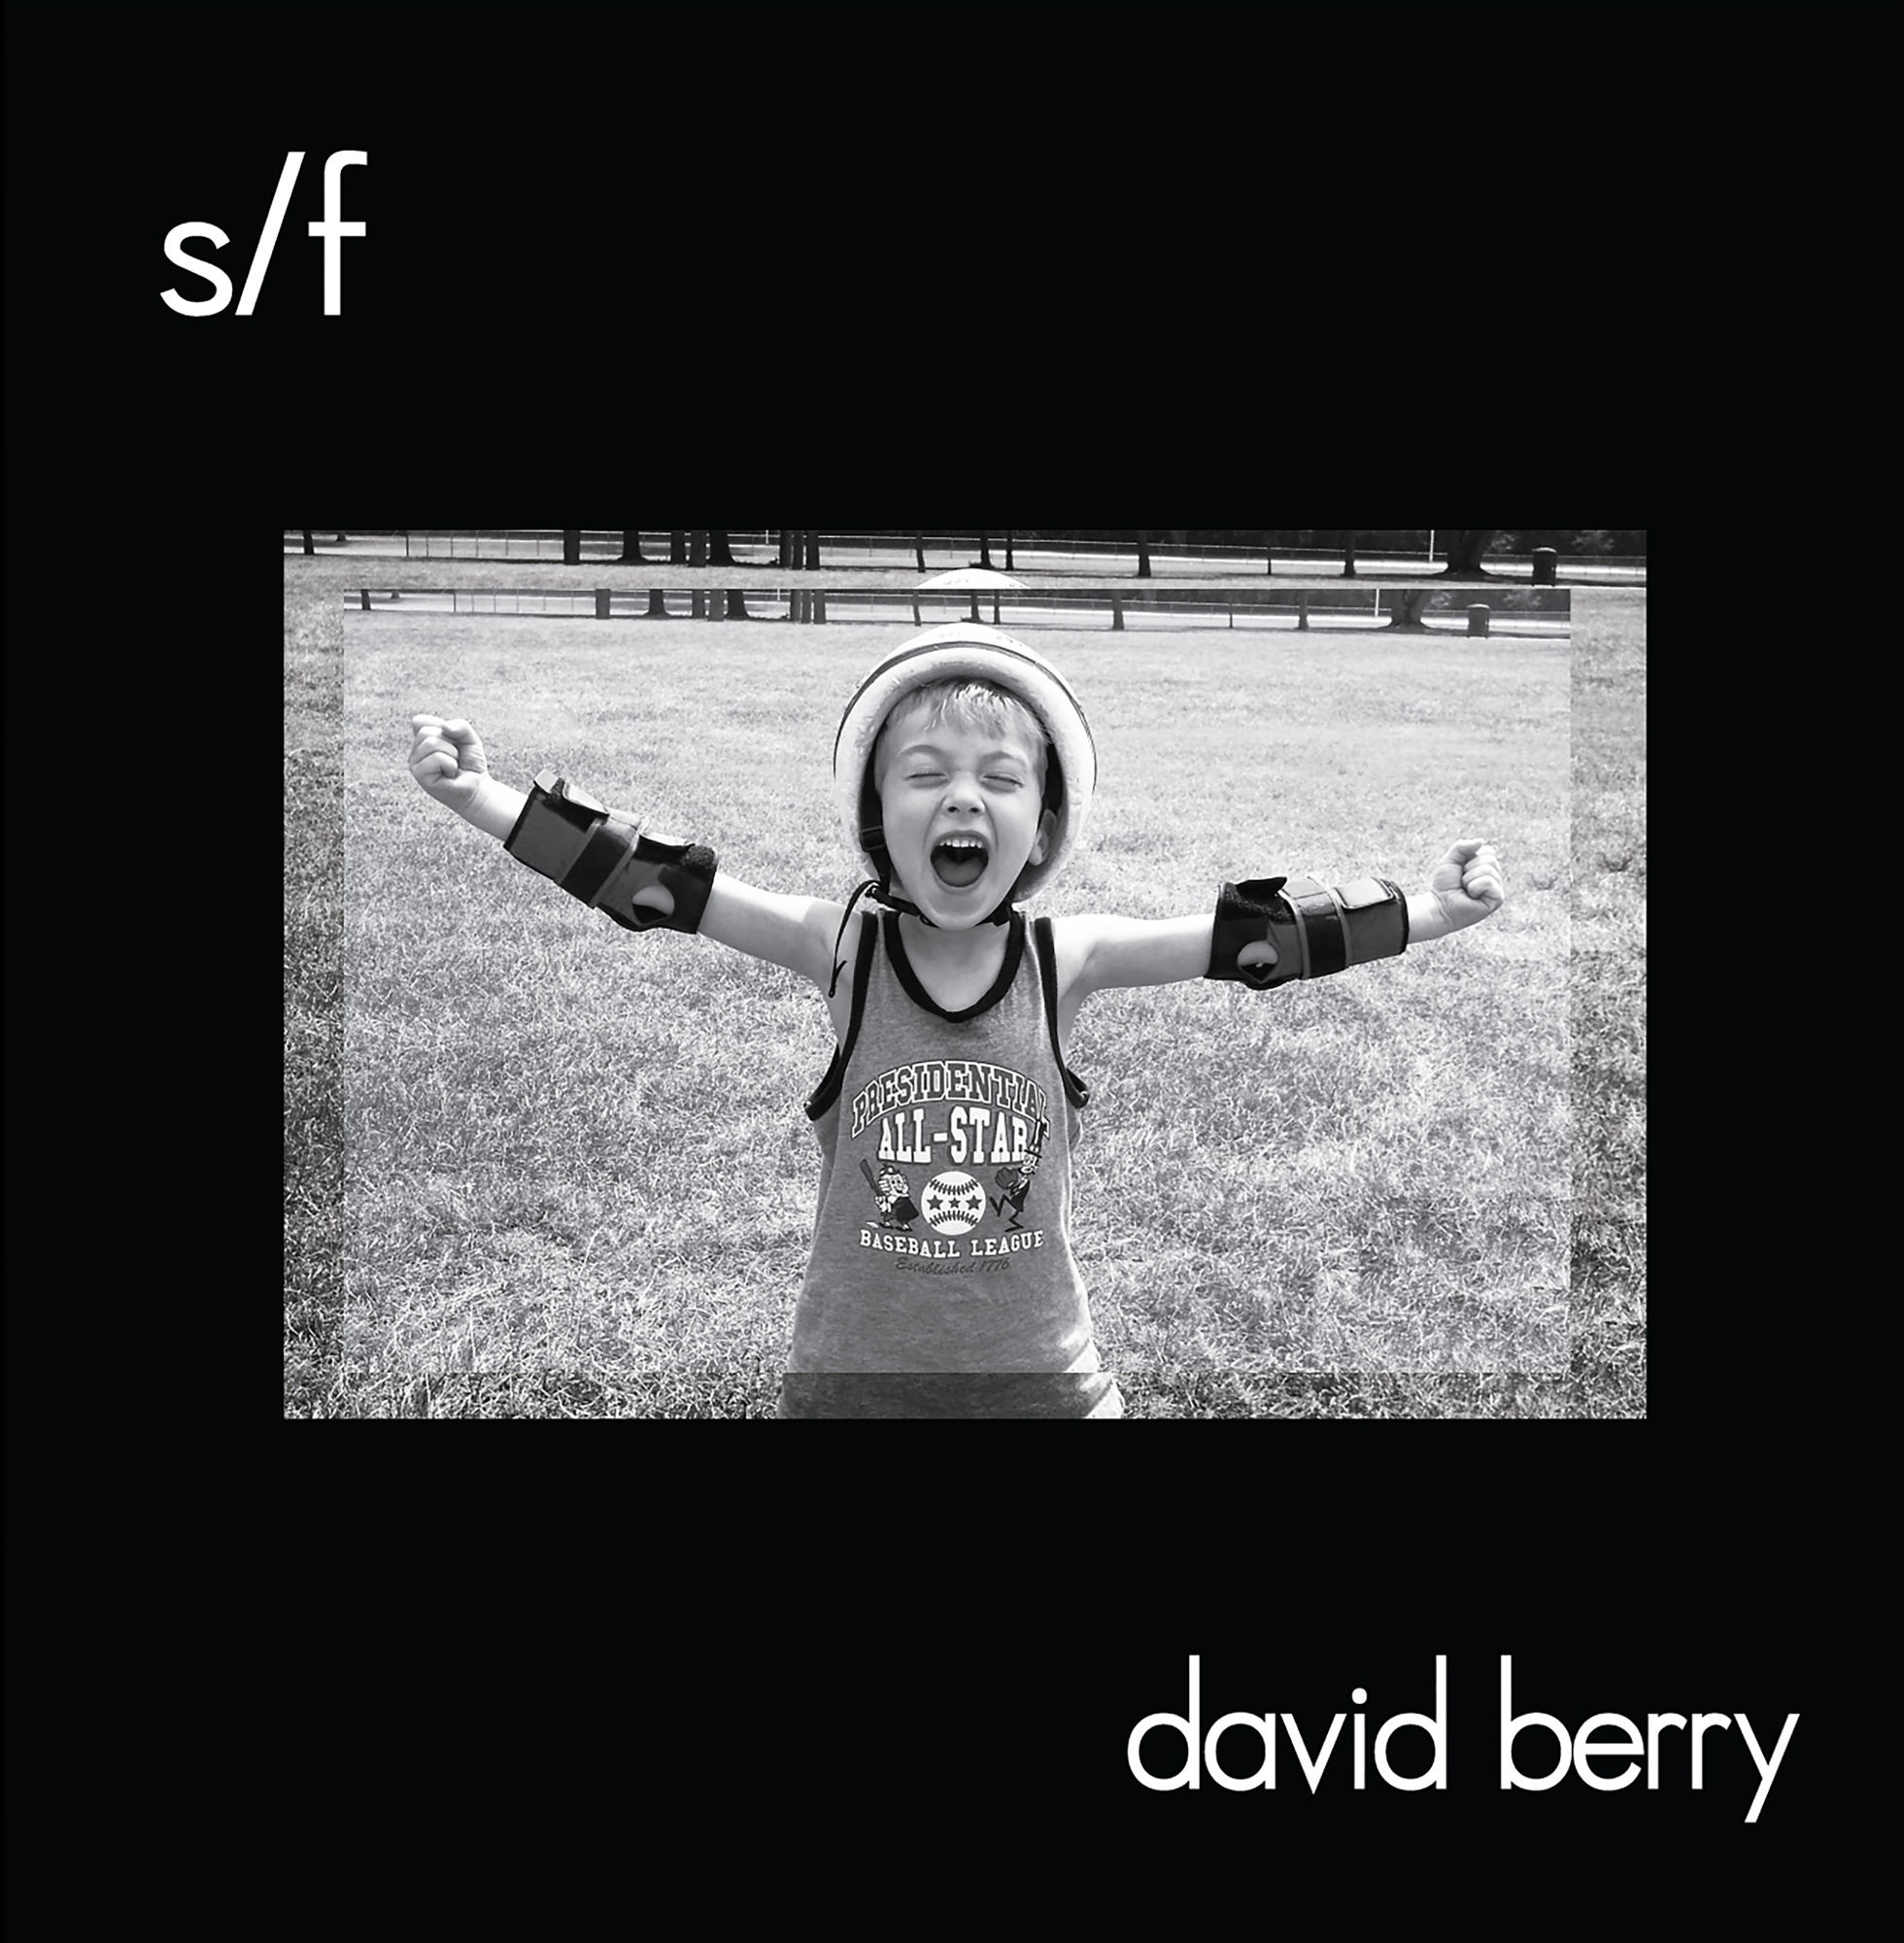 David Berry's son Trent is pictured on the album cover. Courtesy image